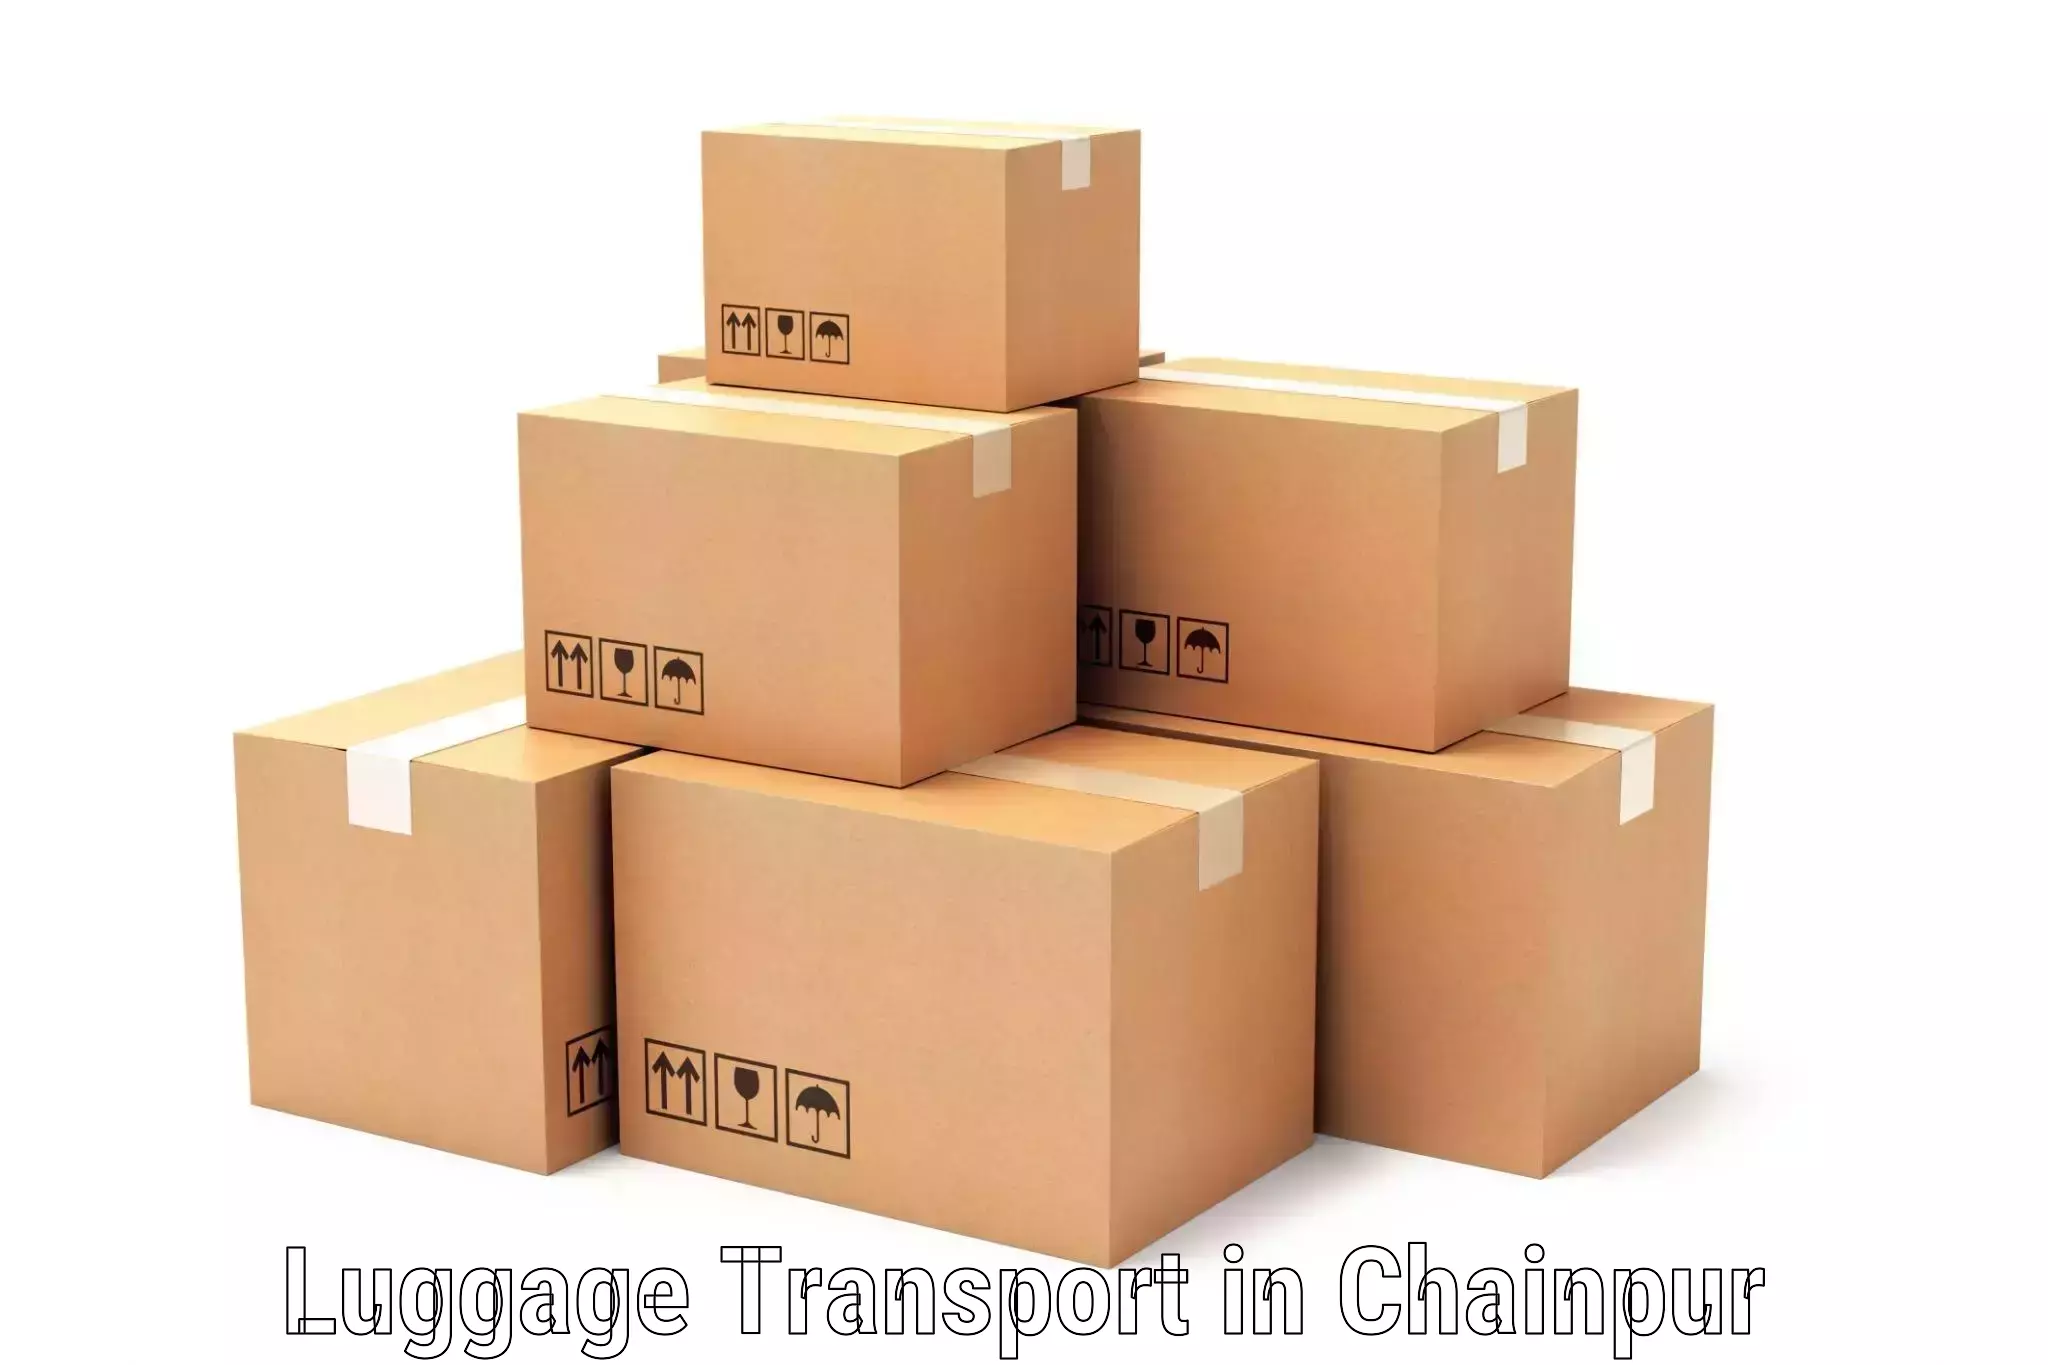 Business luggage transport in Chainpur